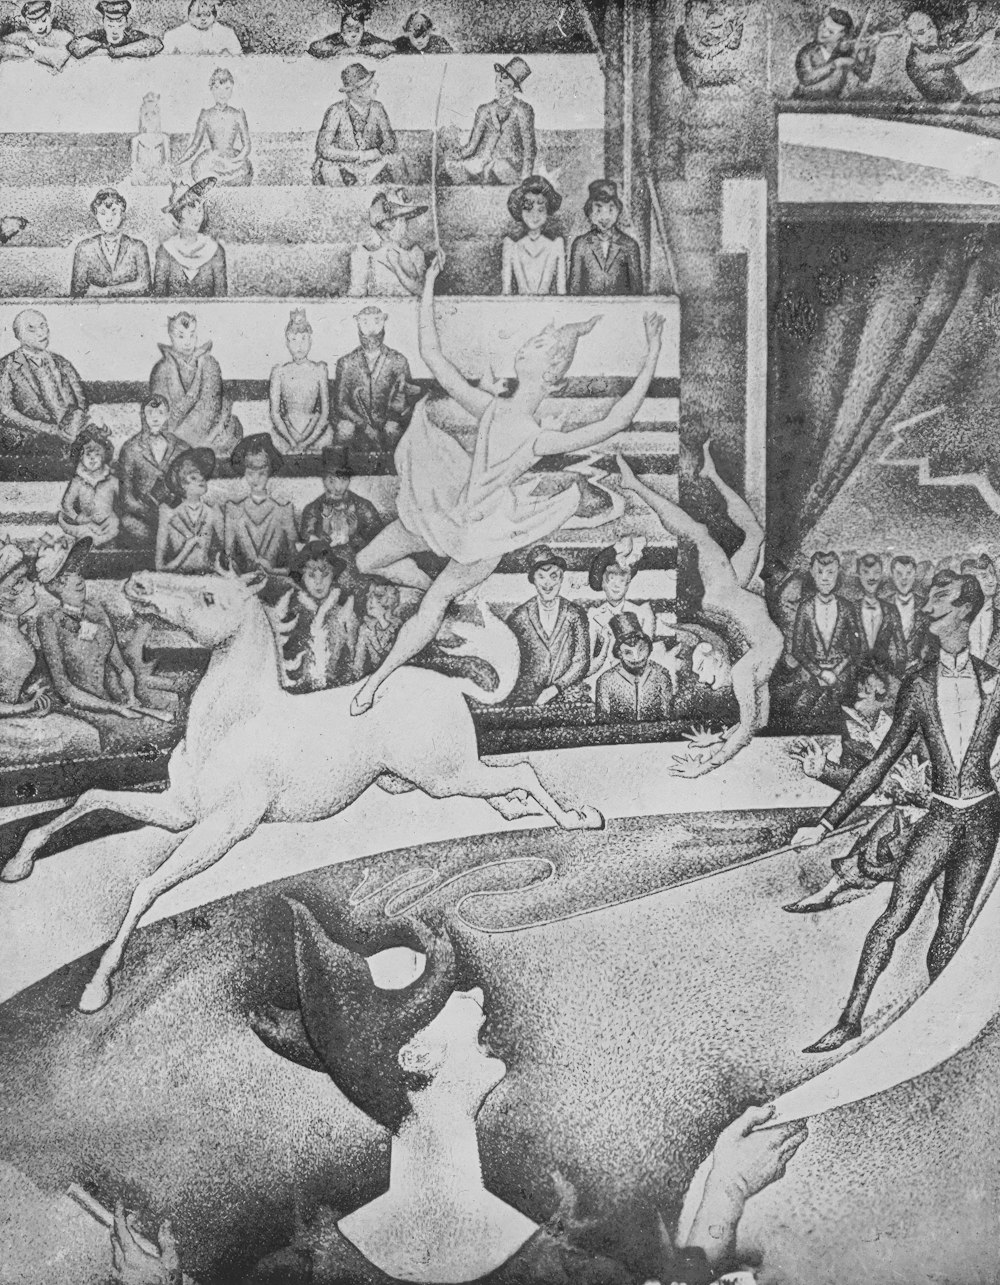 a drawing of a horse jumping over a crowd of people